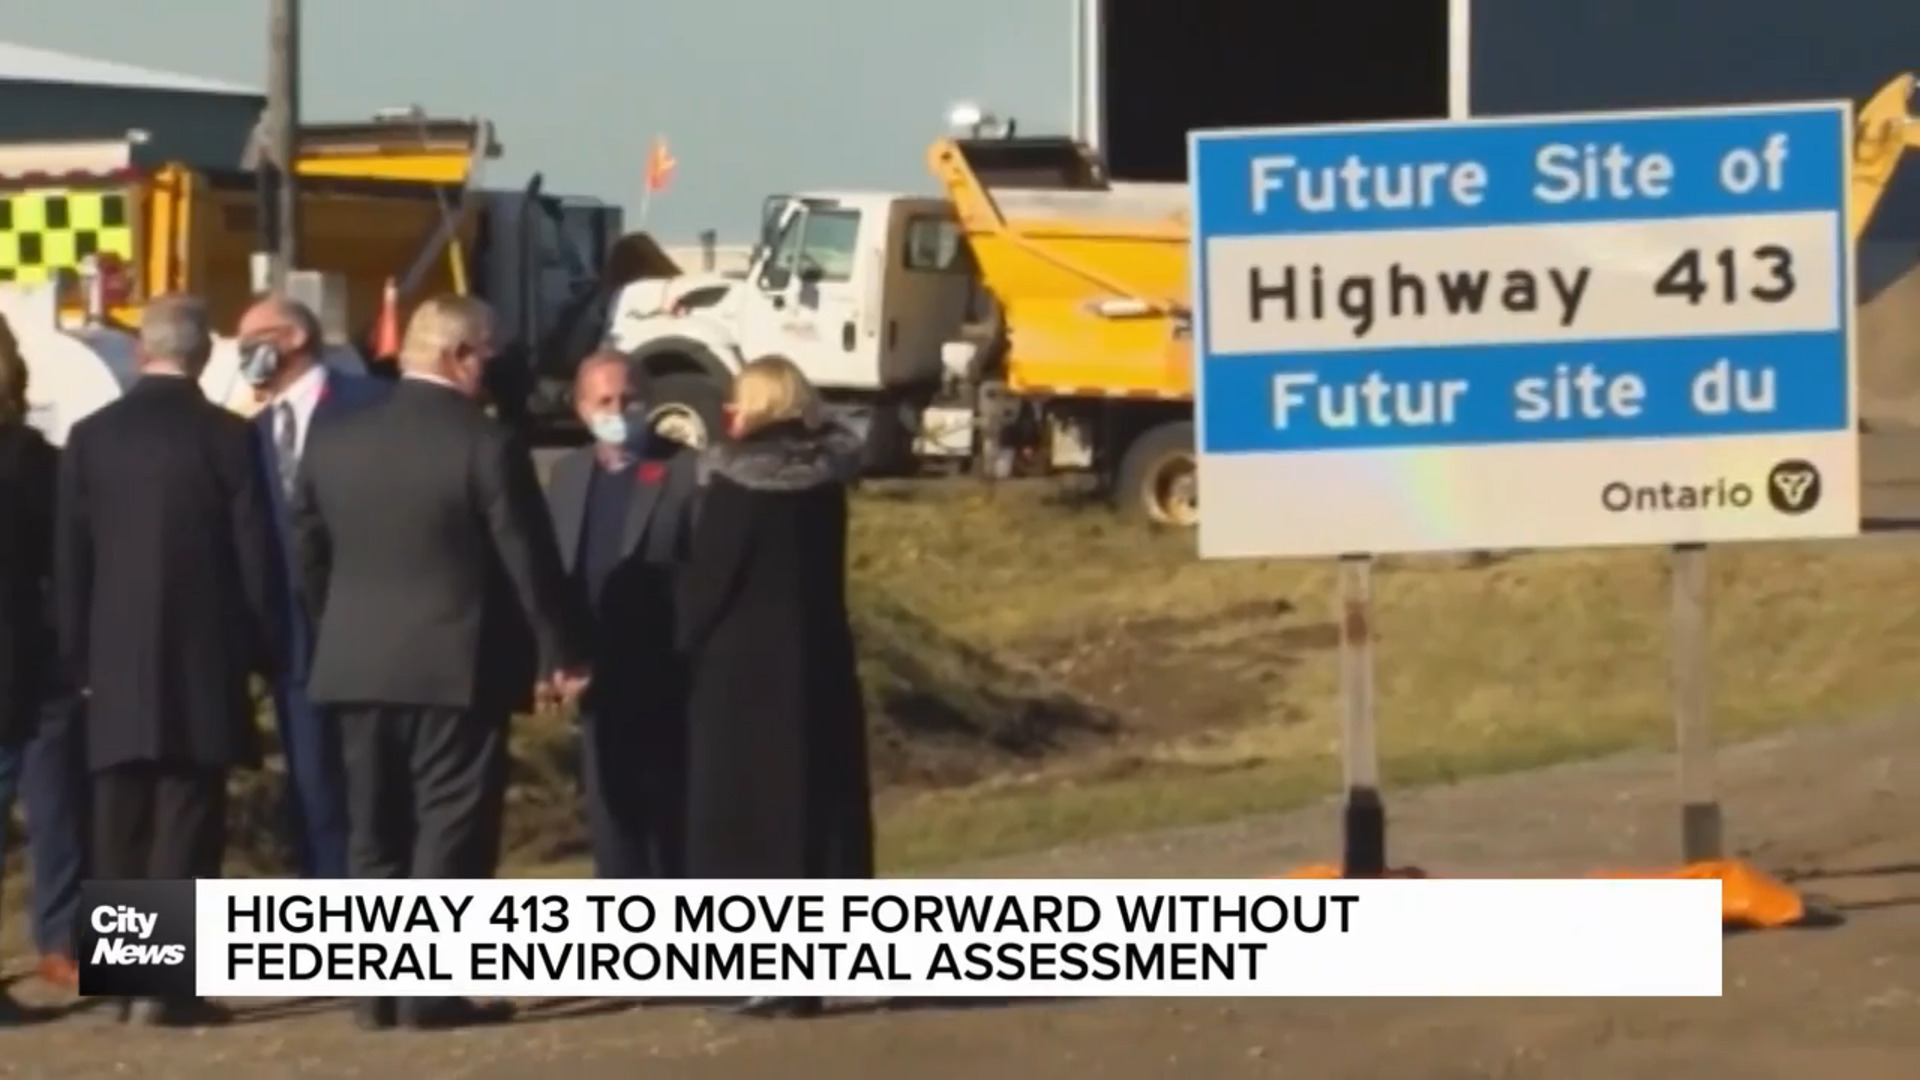 Highway 413 can move forward without federal environmental assessment